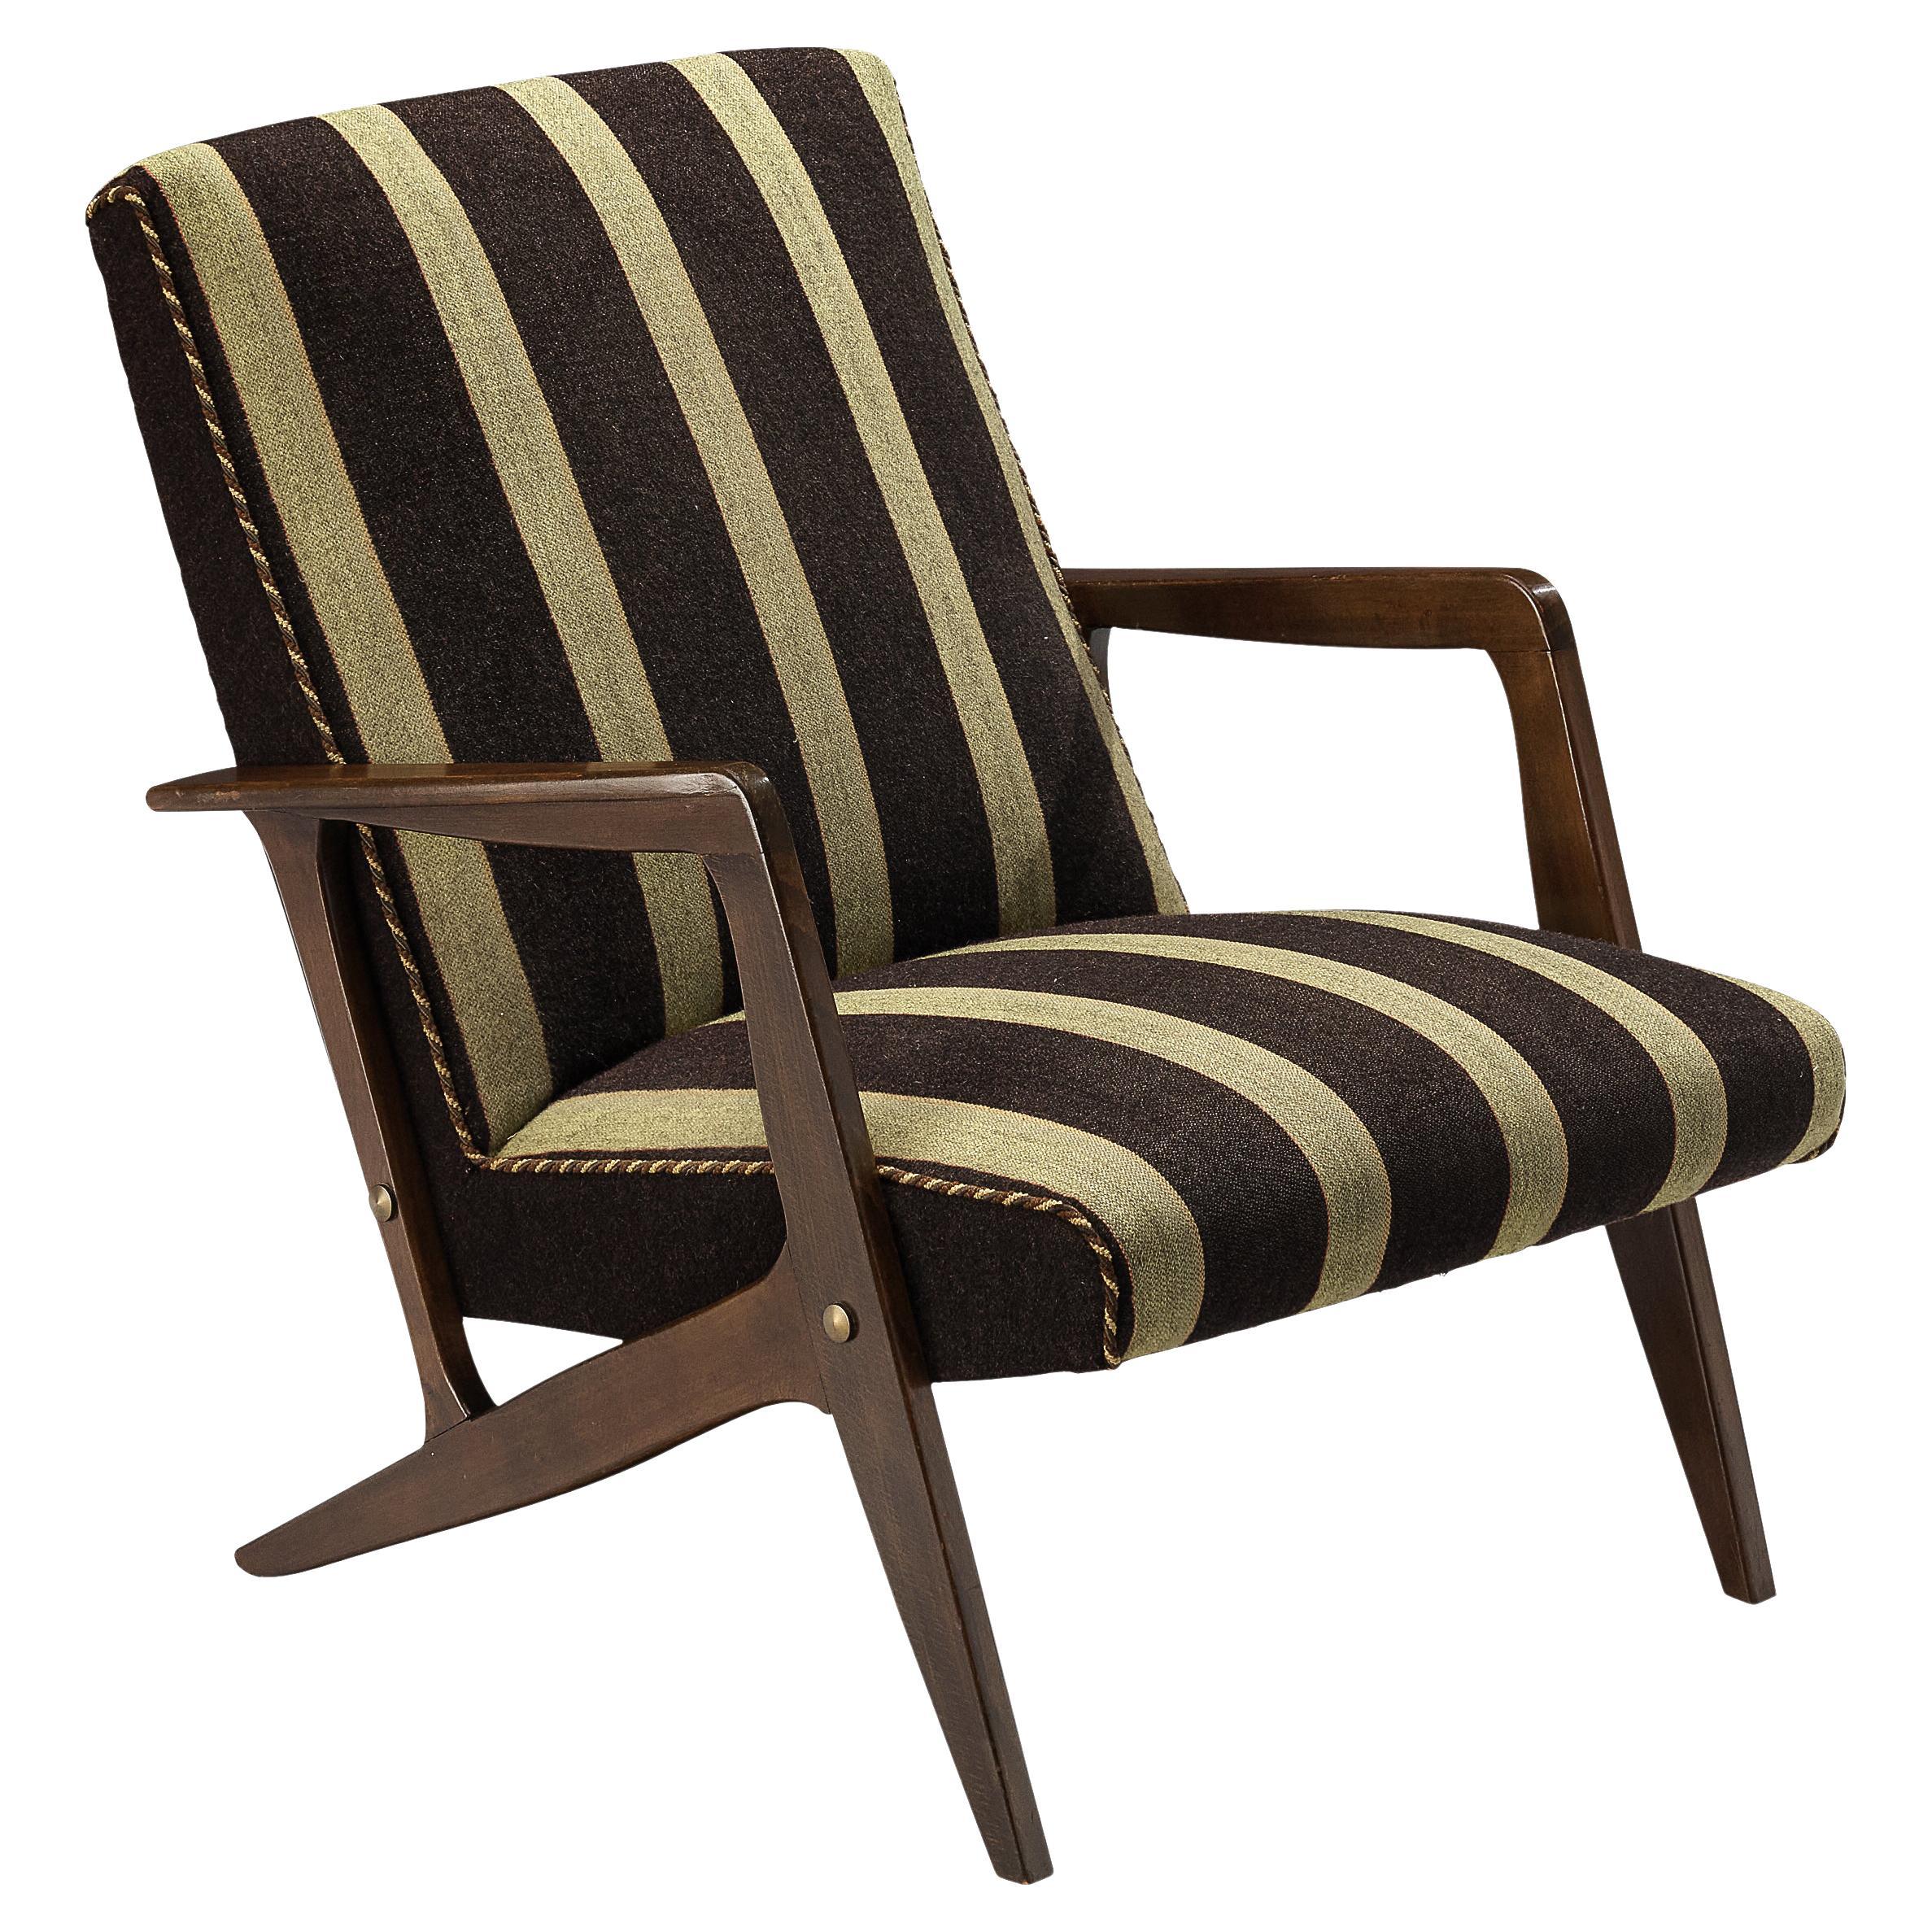 Danish Lounge Chair in Brown Striped Upholstery